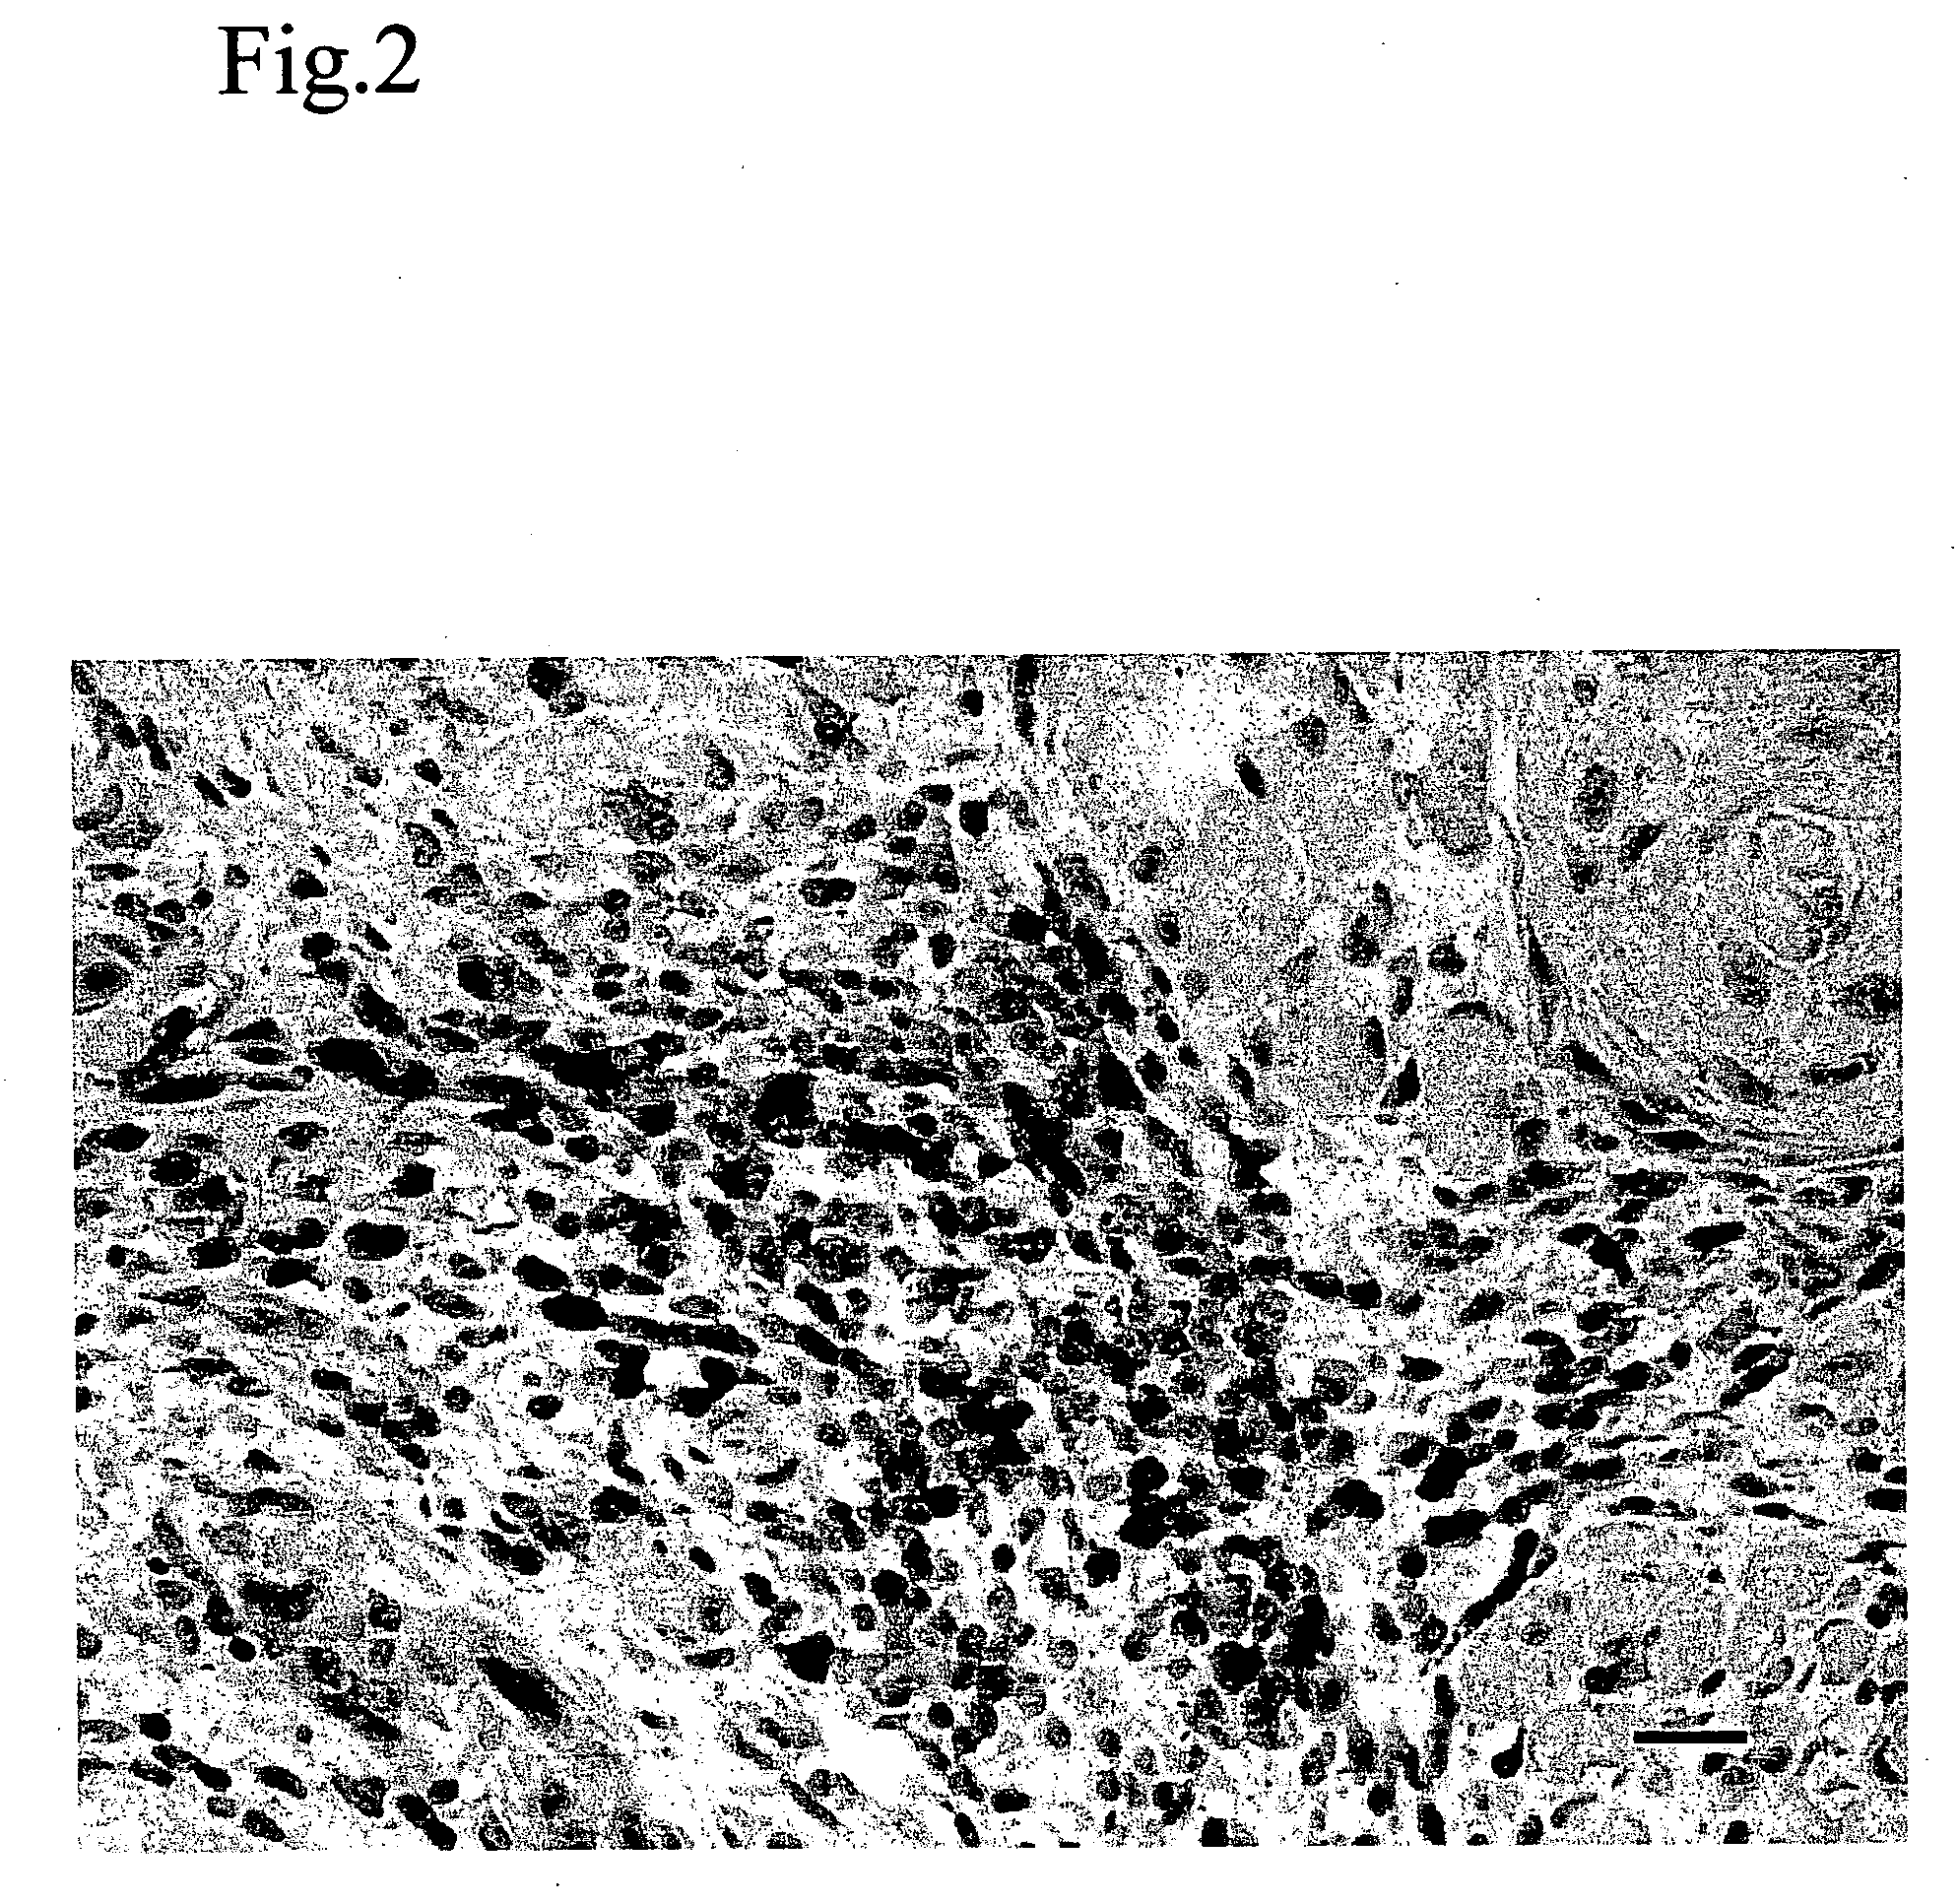 Method for modulating HLA class II tumor cell surface expression with a cytokine mixture